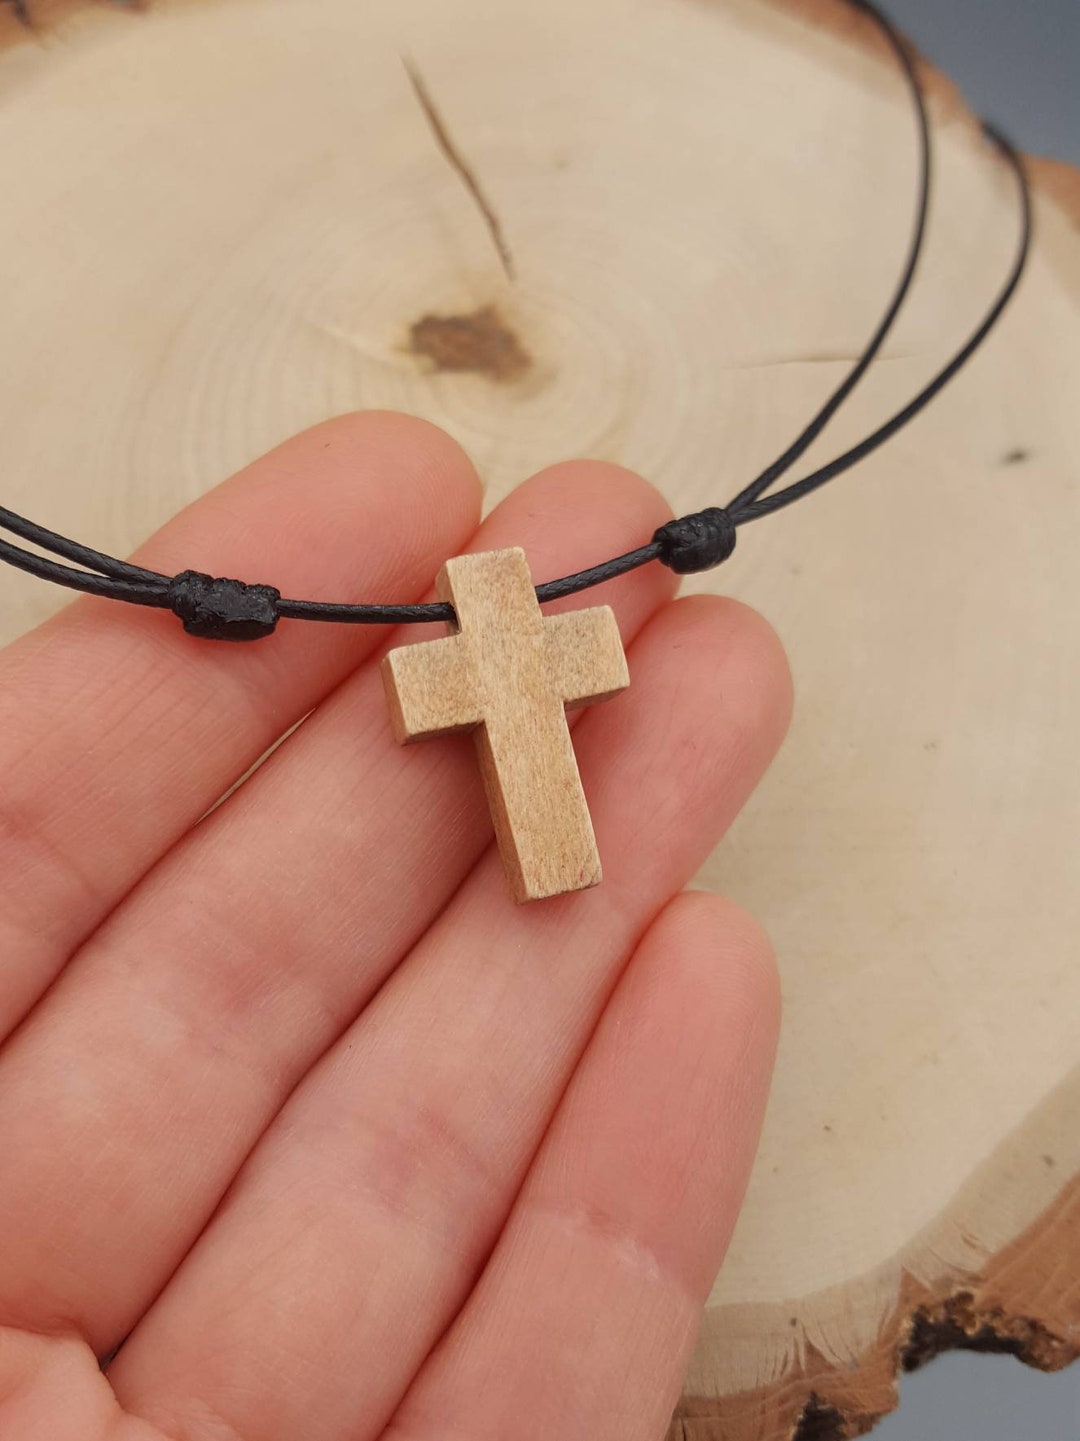 Greek Orthodox Wood Cross Pendant Necklace with Adjustable Cord Style 3